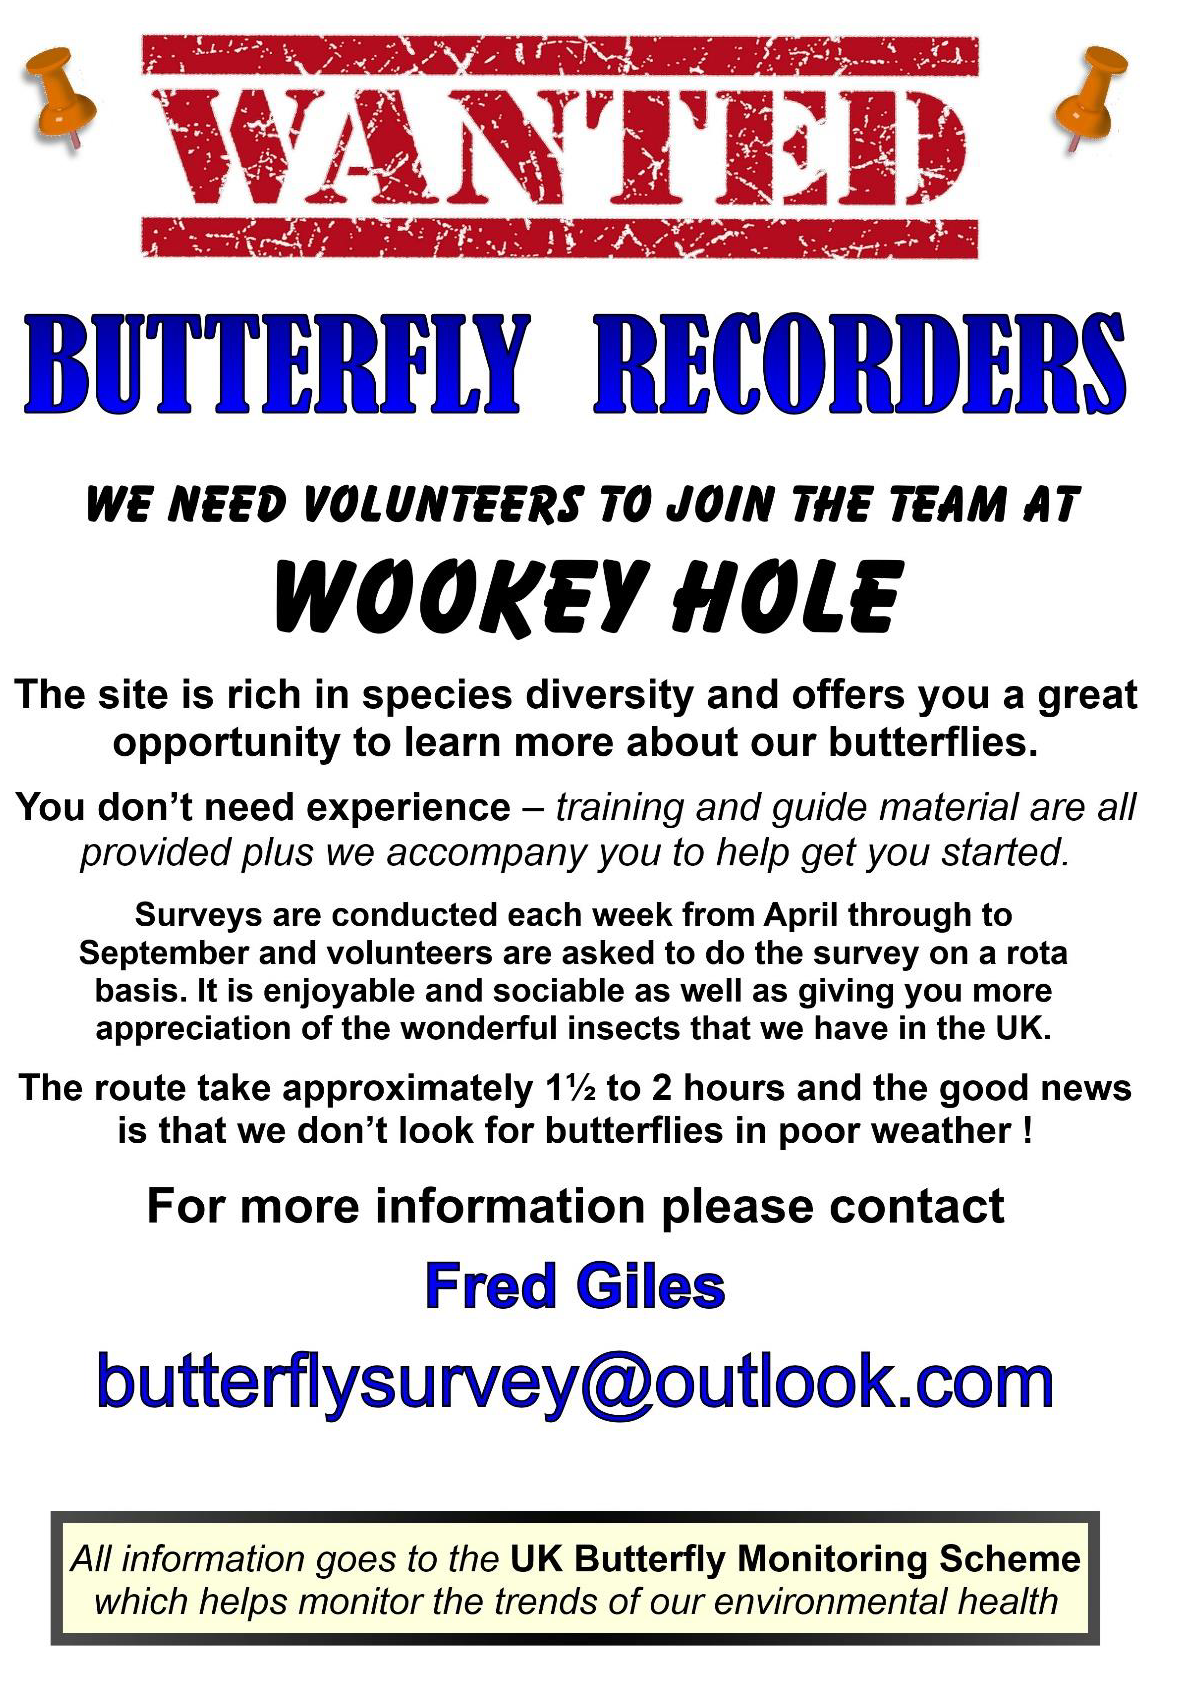 Call for butterfly recorders